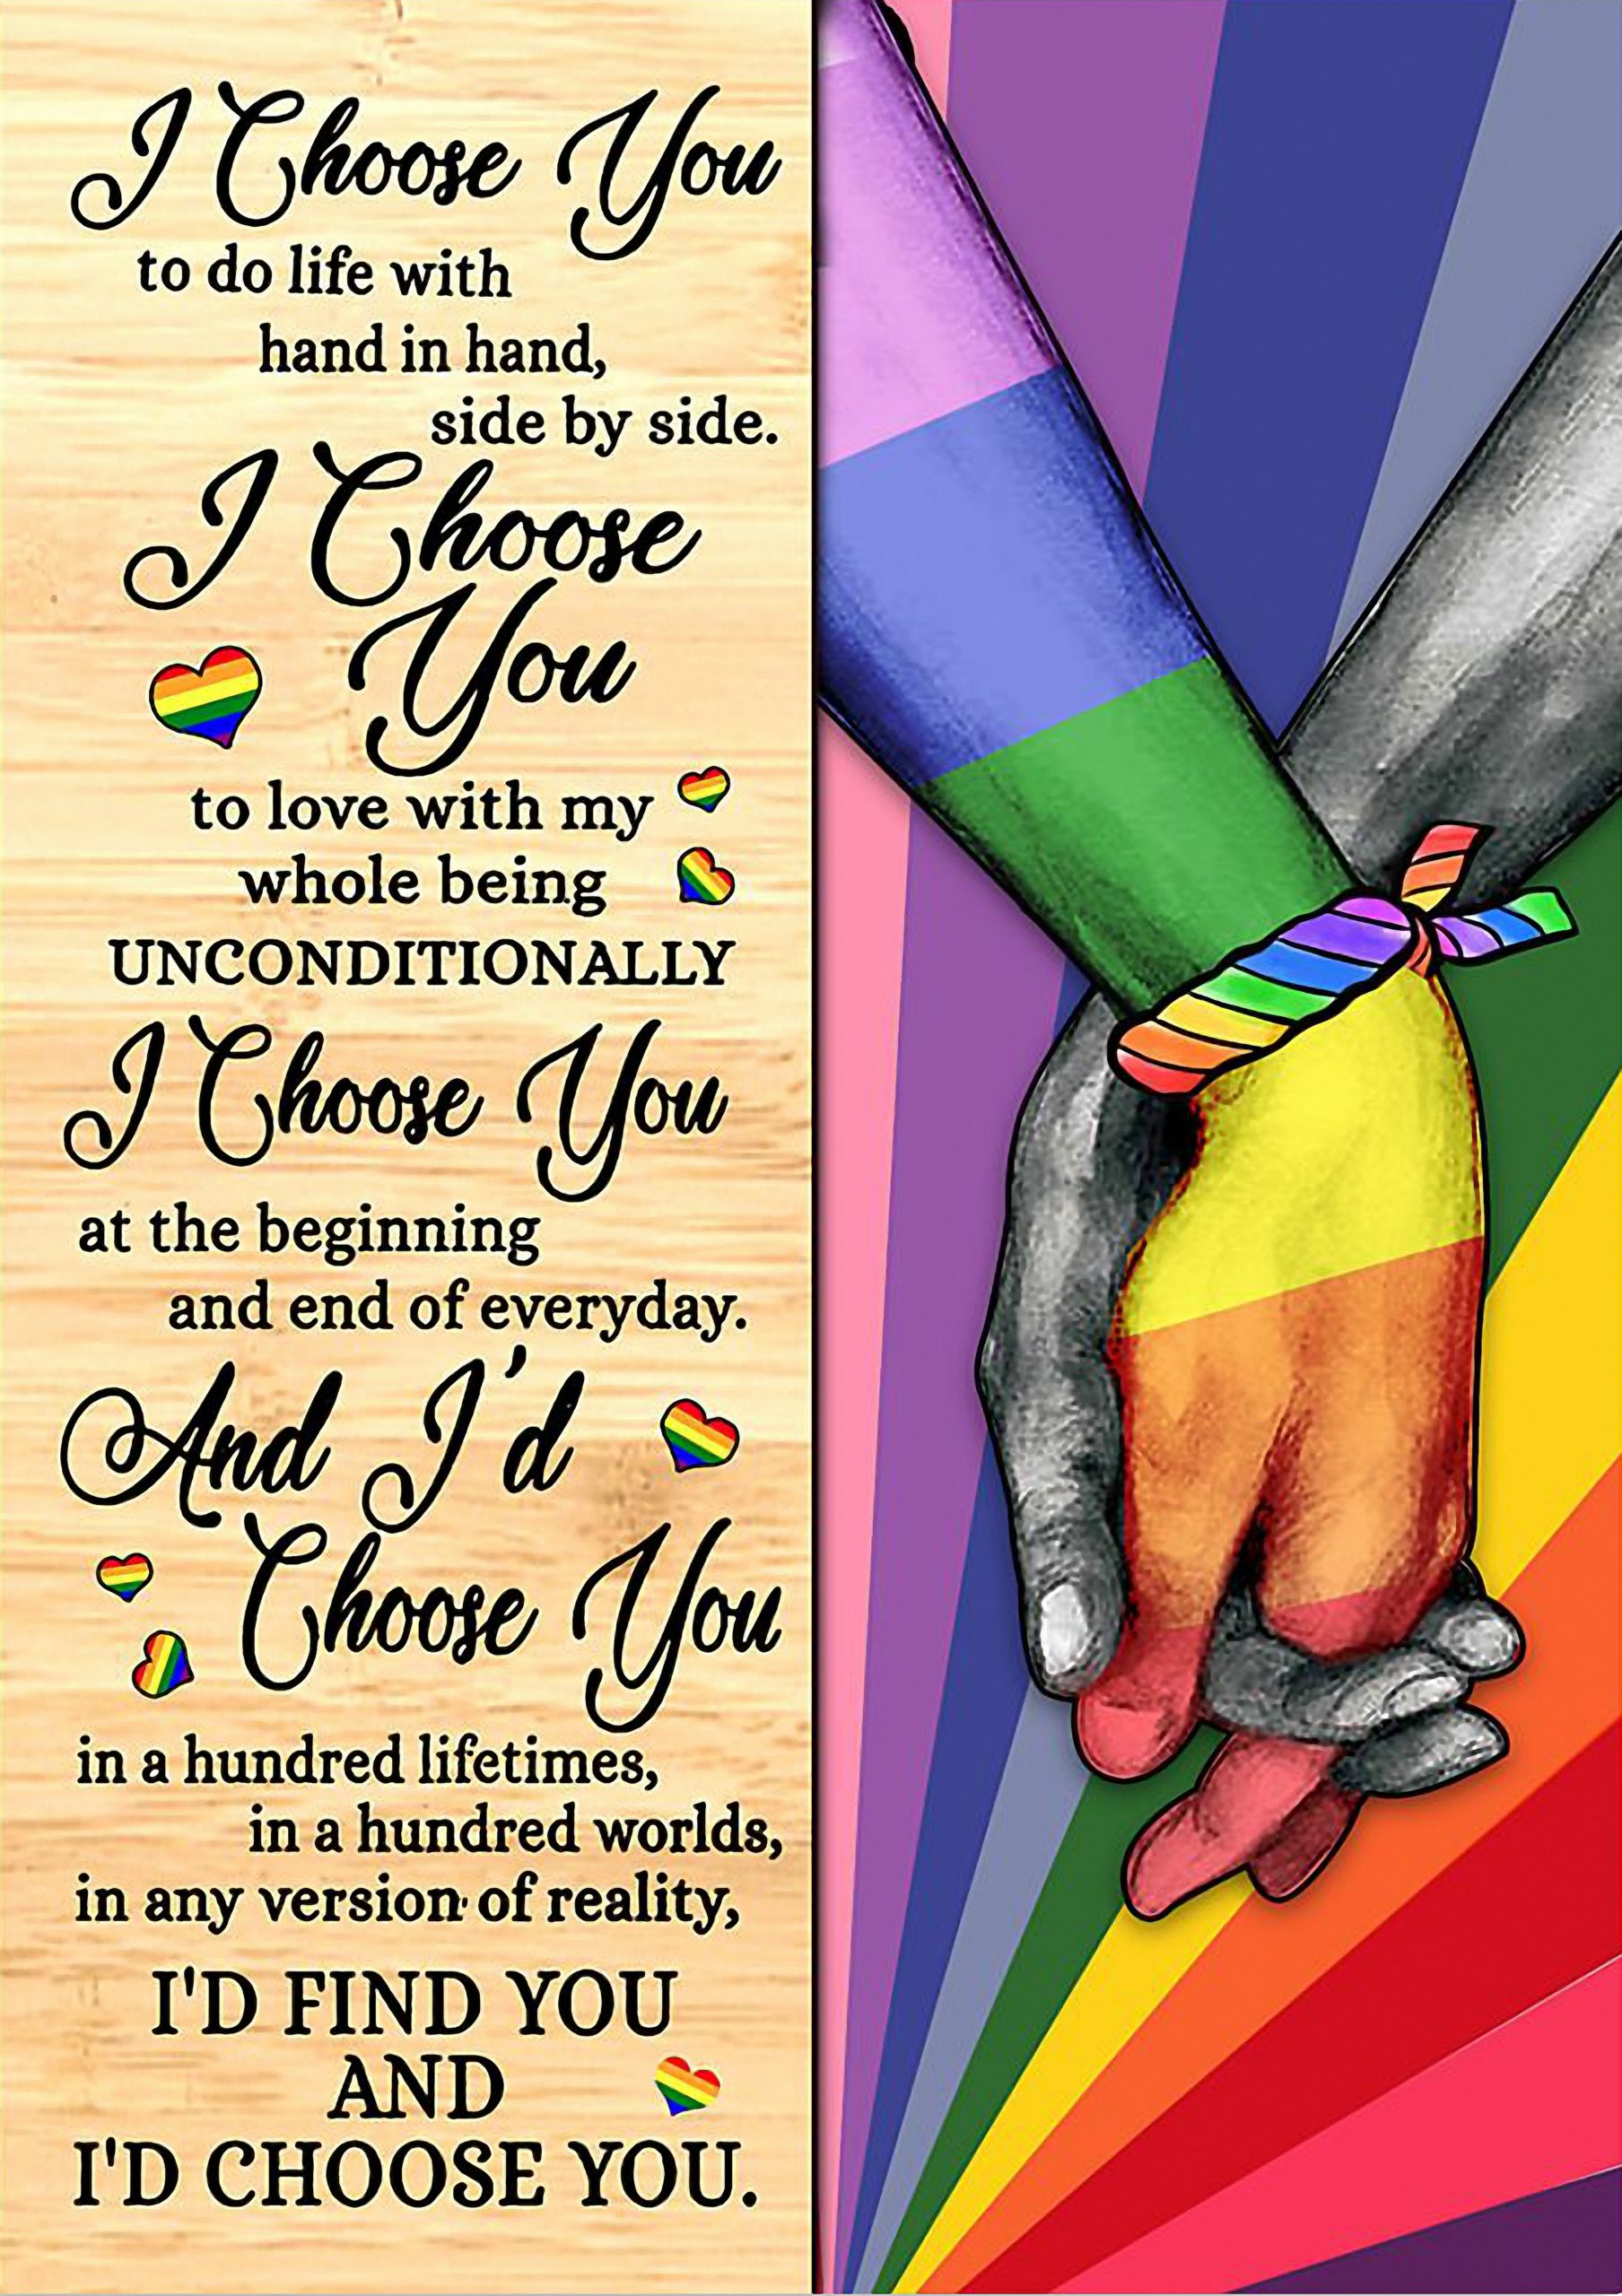 LGBT I choose you to do life with hand in hand side by side poster